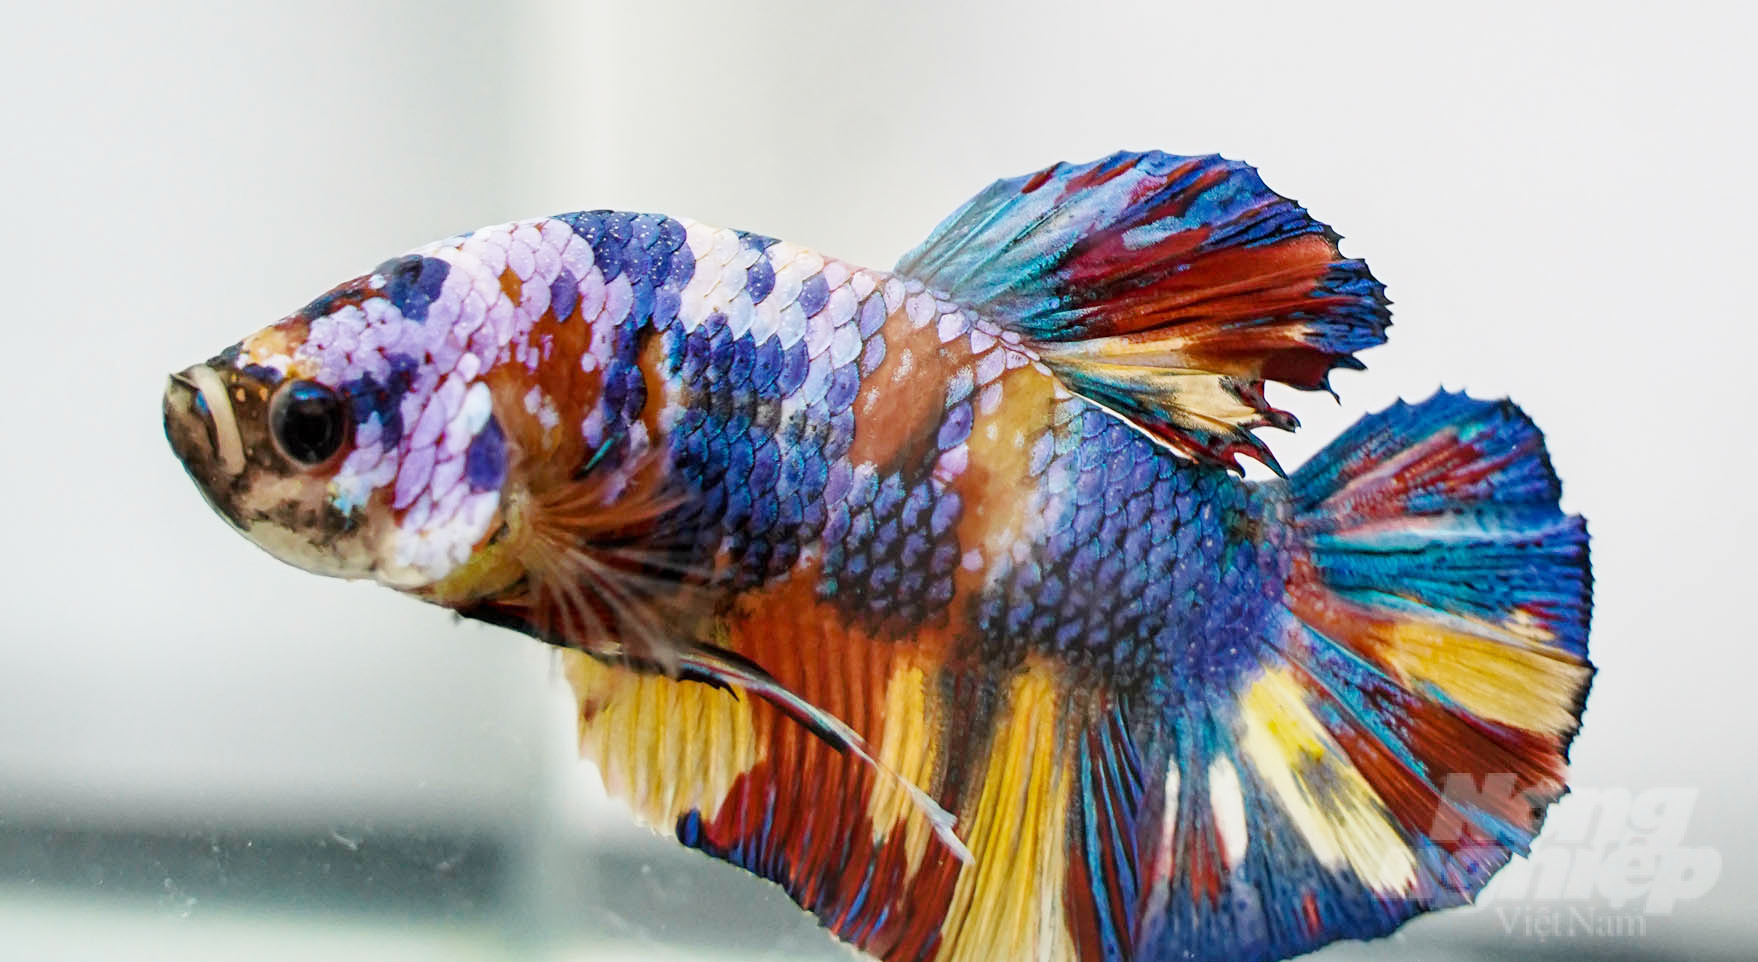 From ancient times until now, ornamental fish have always been a passion of Saigon people. Photo: Le Binh.